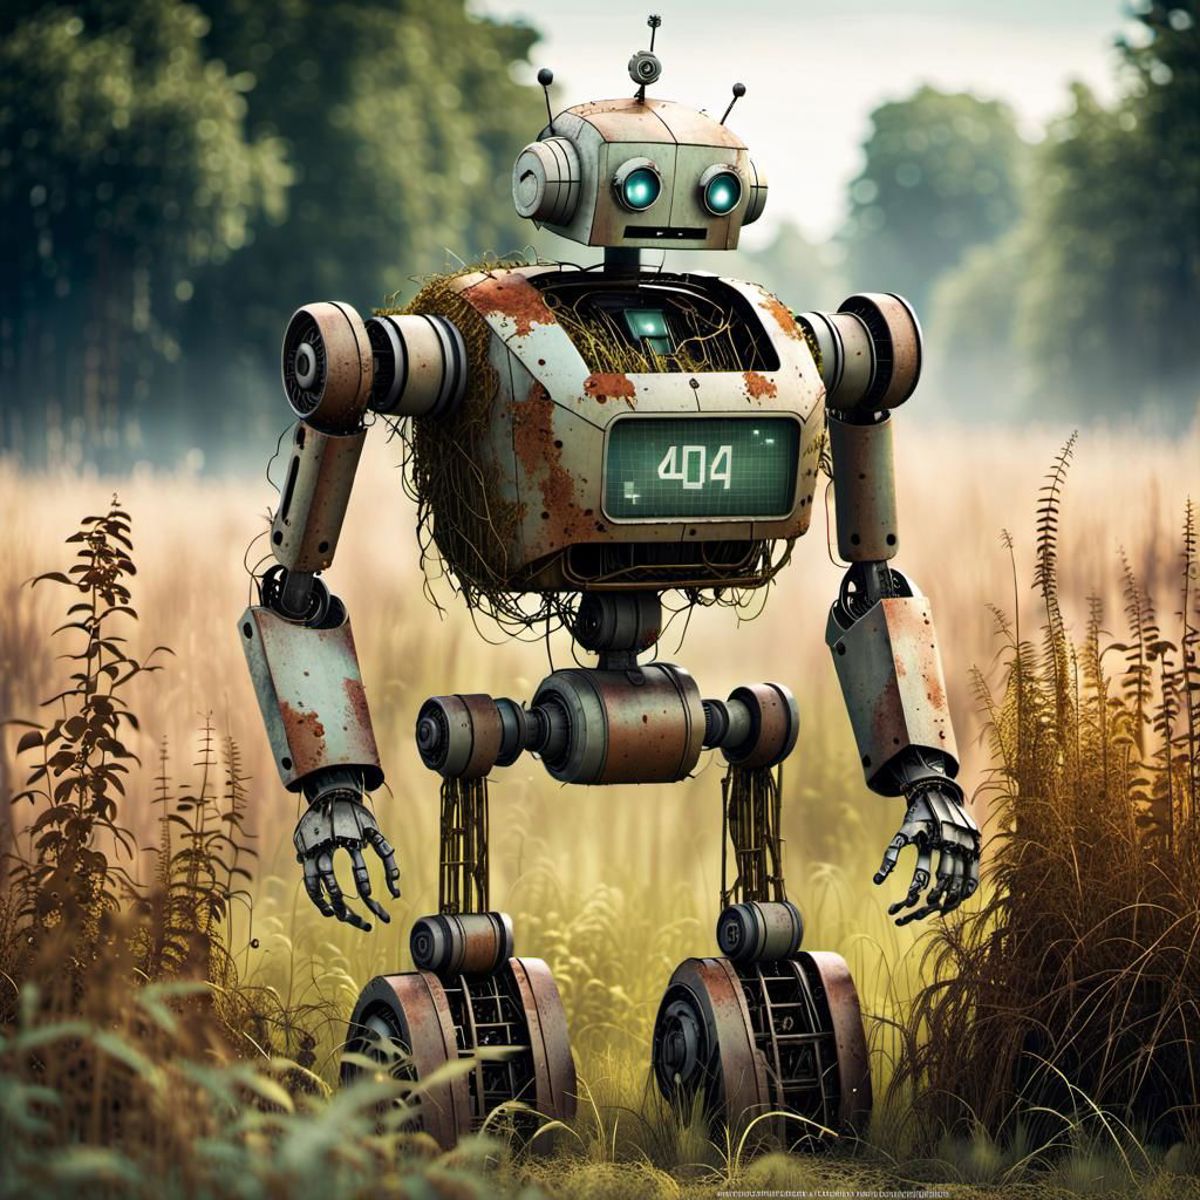 A robot with the number 404 on the front standing in the grass.